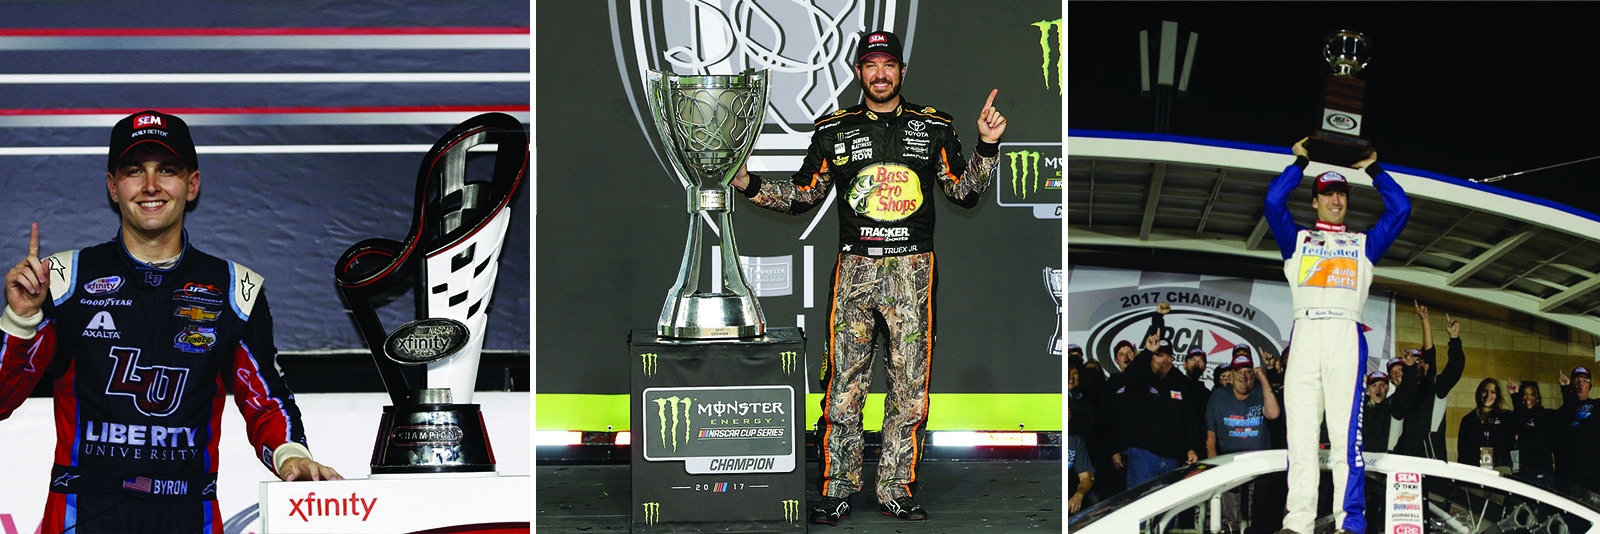 SEM Racing Takes Multiple Checkered Flags on the Final NASCAR Race Weekend! 2017 MONSTER ENERGY NASCAR CUP SERIES CHAMPION – Martin Truex, Jr/Furniture Row Racing, 2017 NASCAR XFINITY SERIES CHAMPION – William Byron/JR Motorsports, 2017 ARCA SERIES CHAMPI